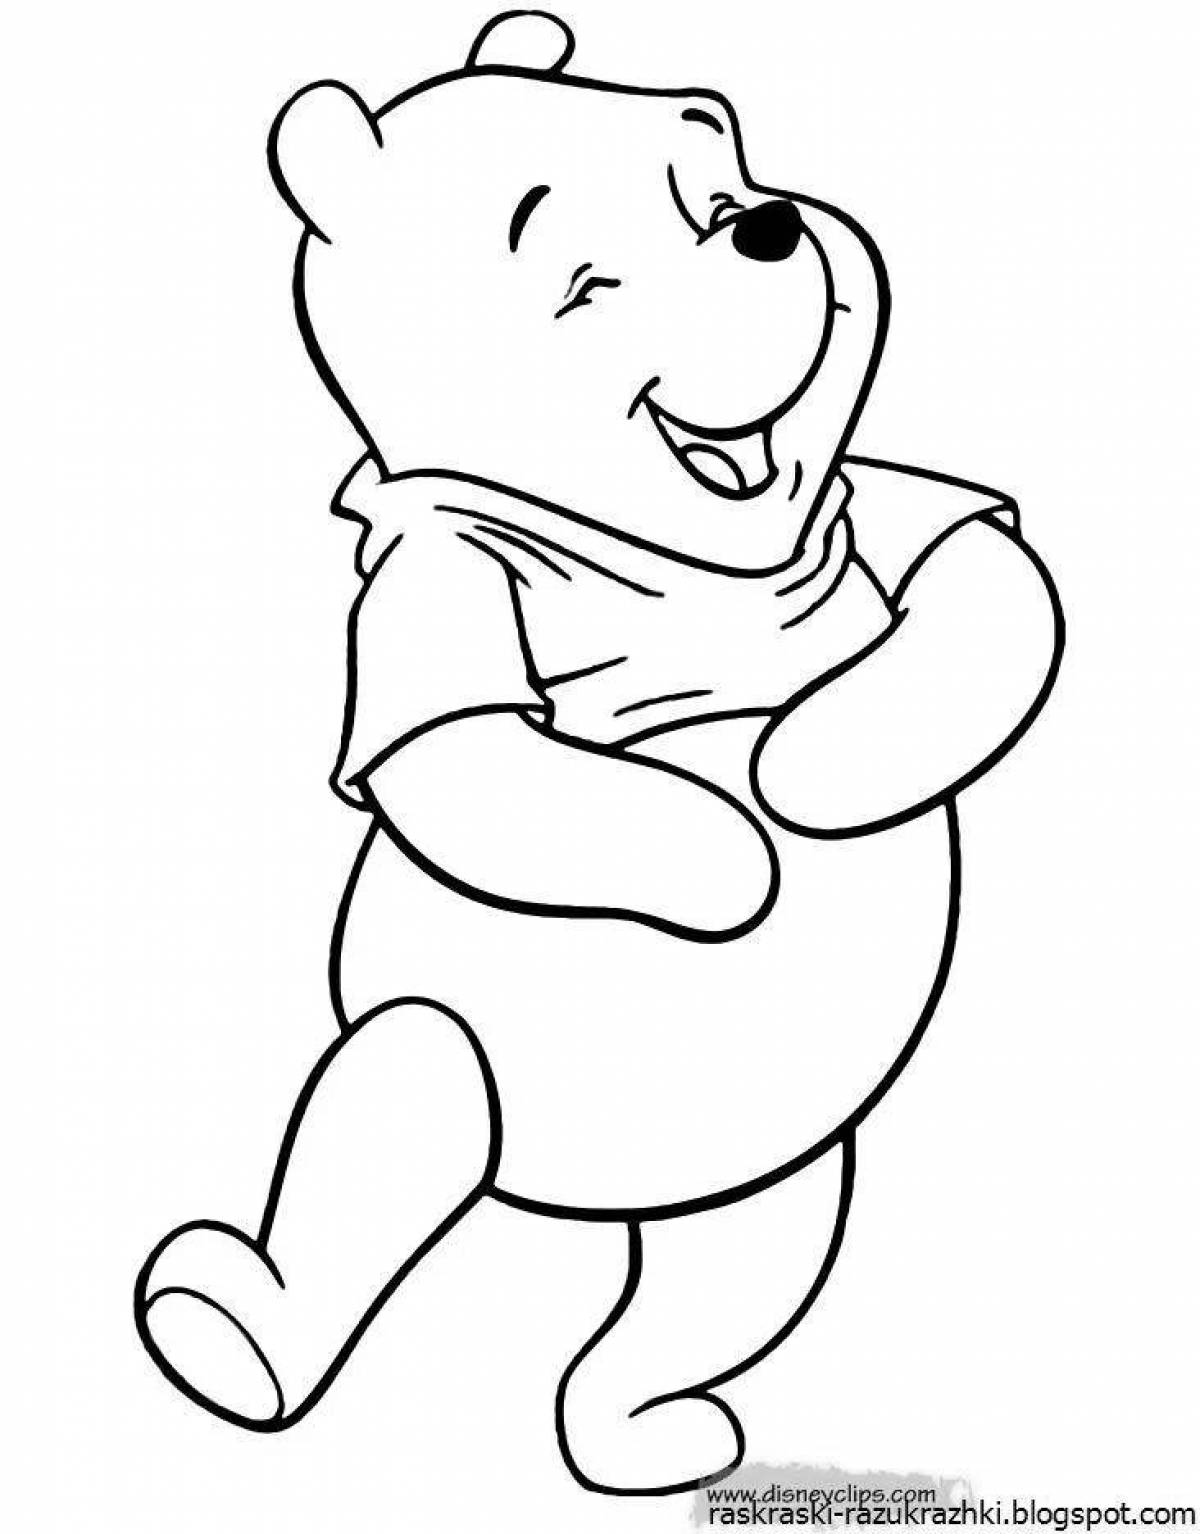 Coloring book funny cartoon characters